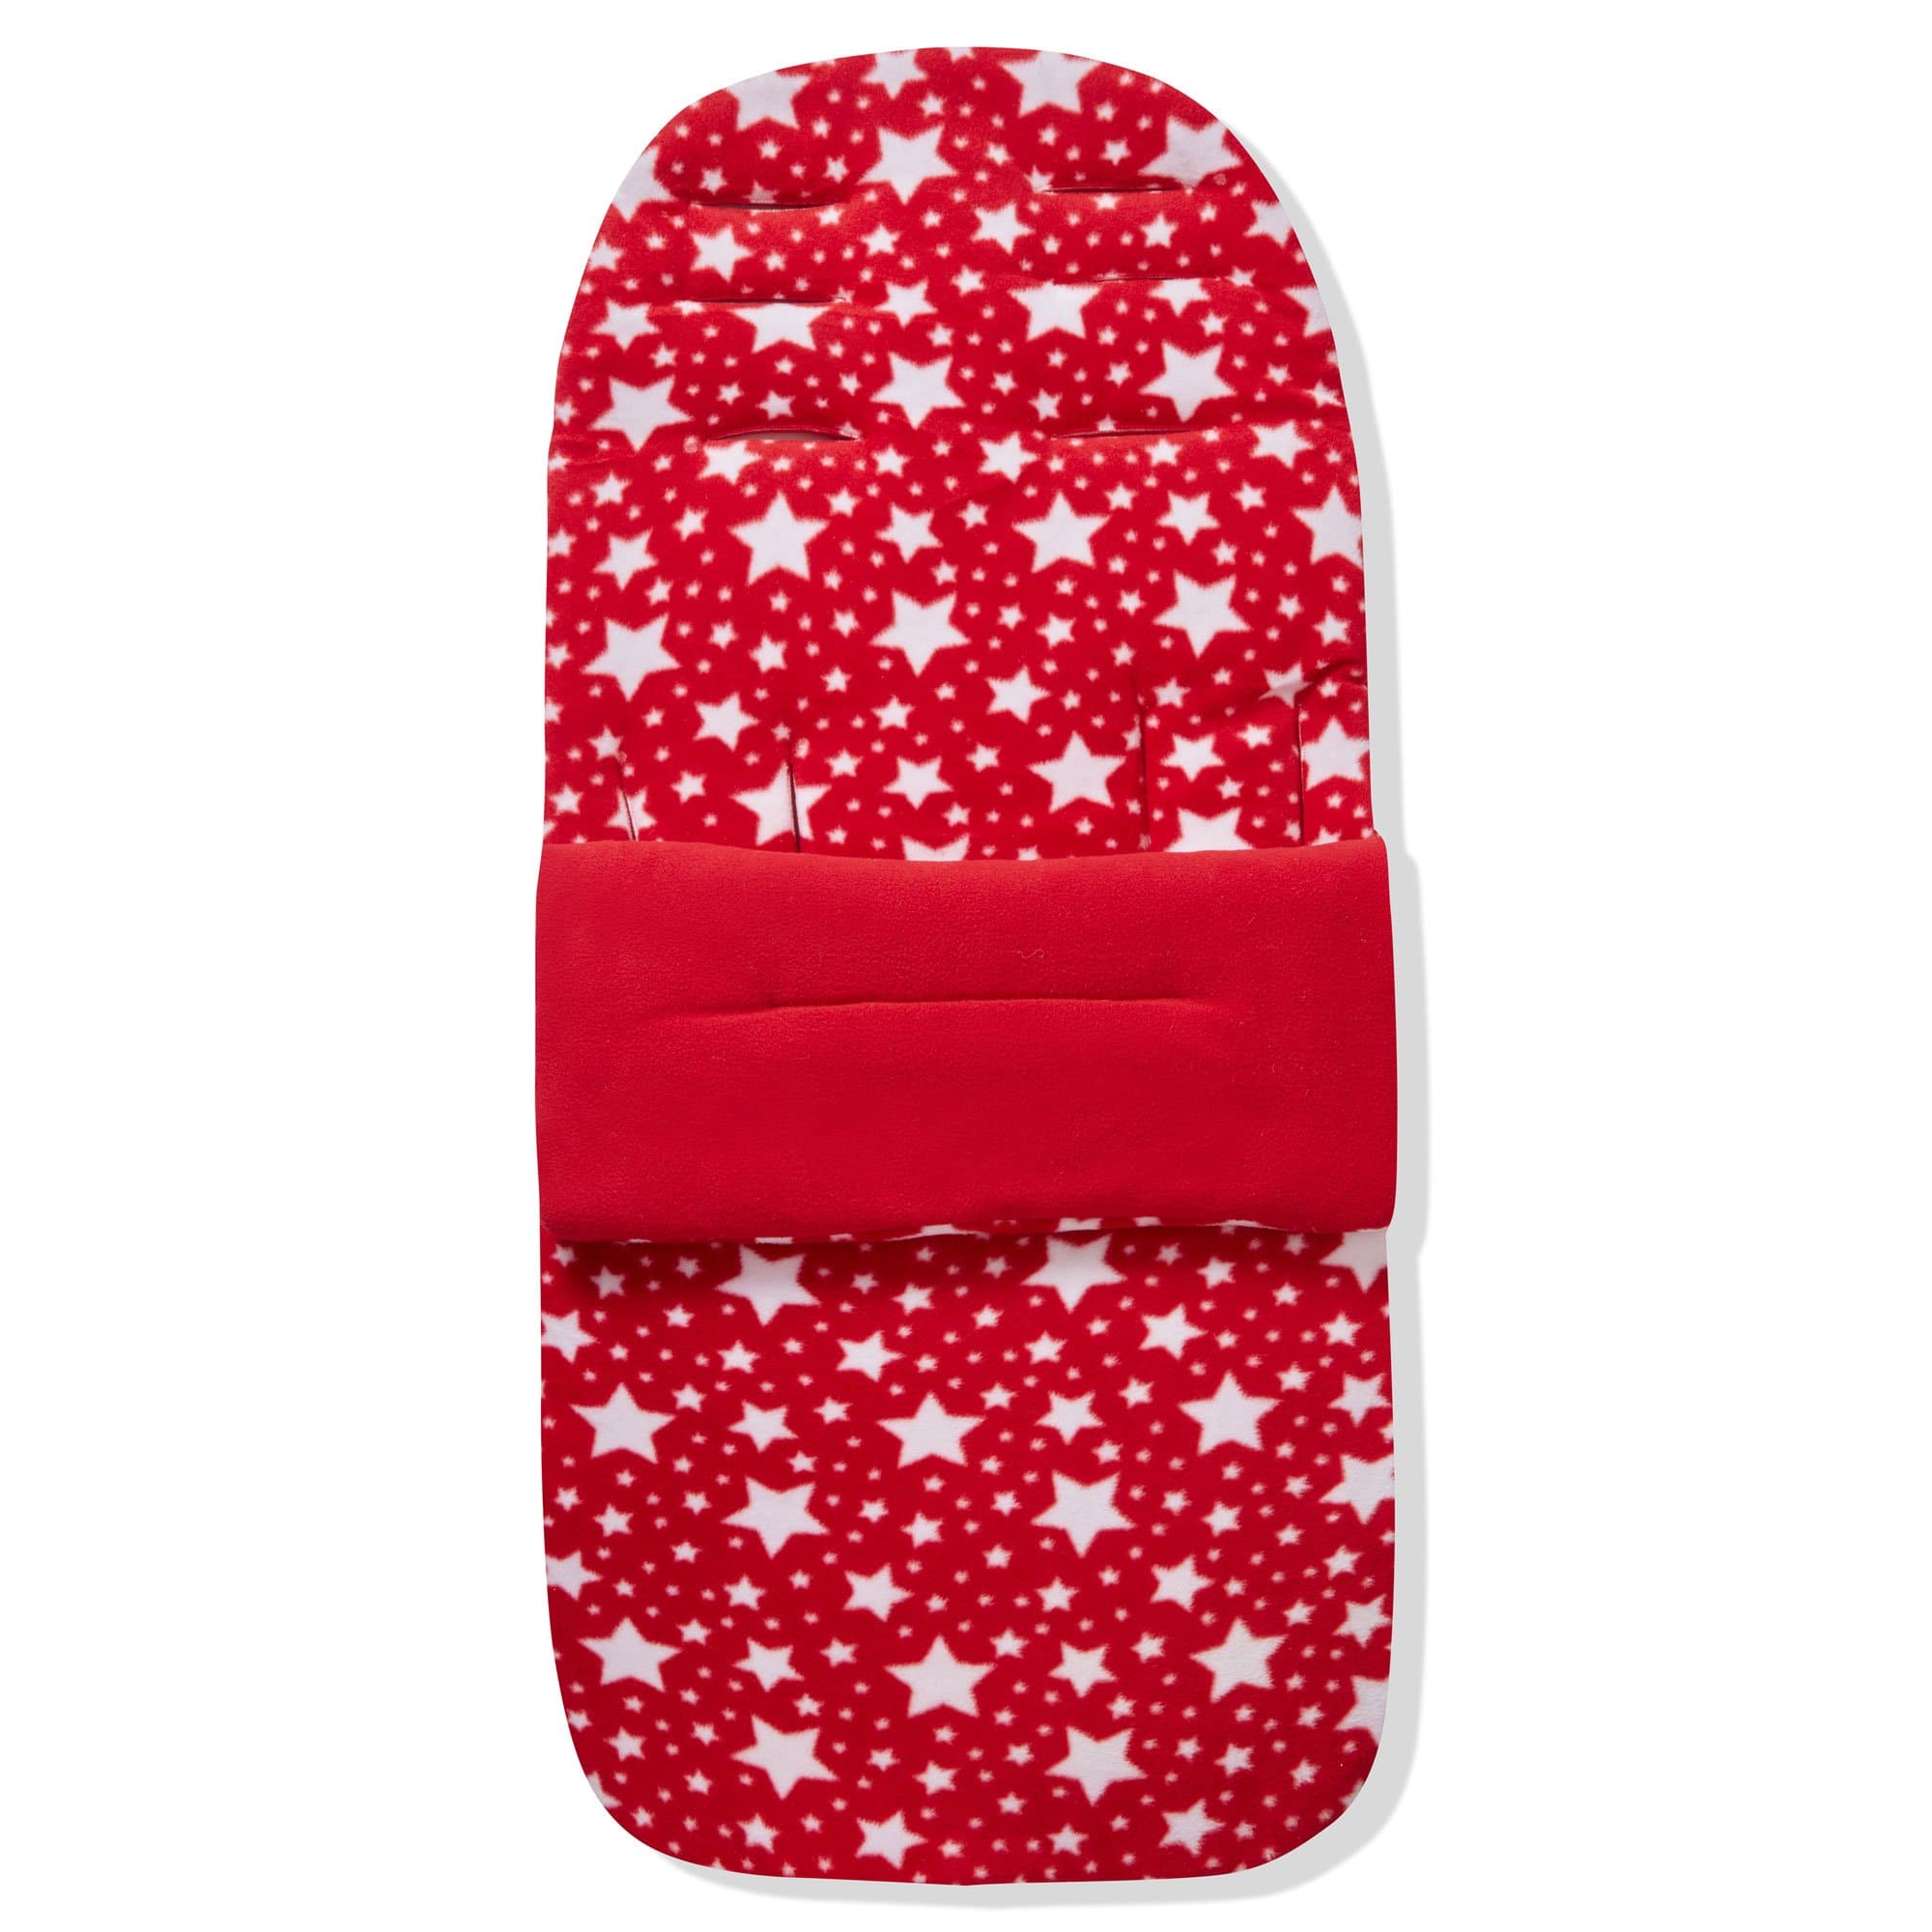 Fleece Footmuff / Cosy Toes Compatible with Tippitoes - Red Star / Fits All Models | For Your Little One